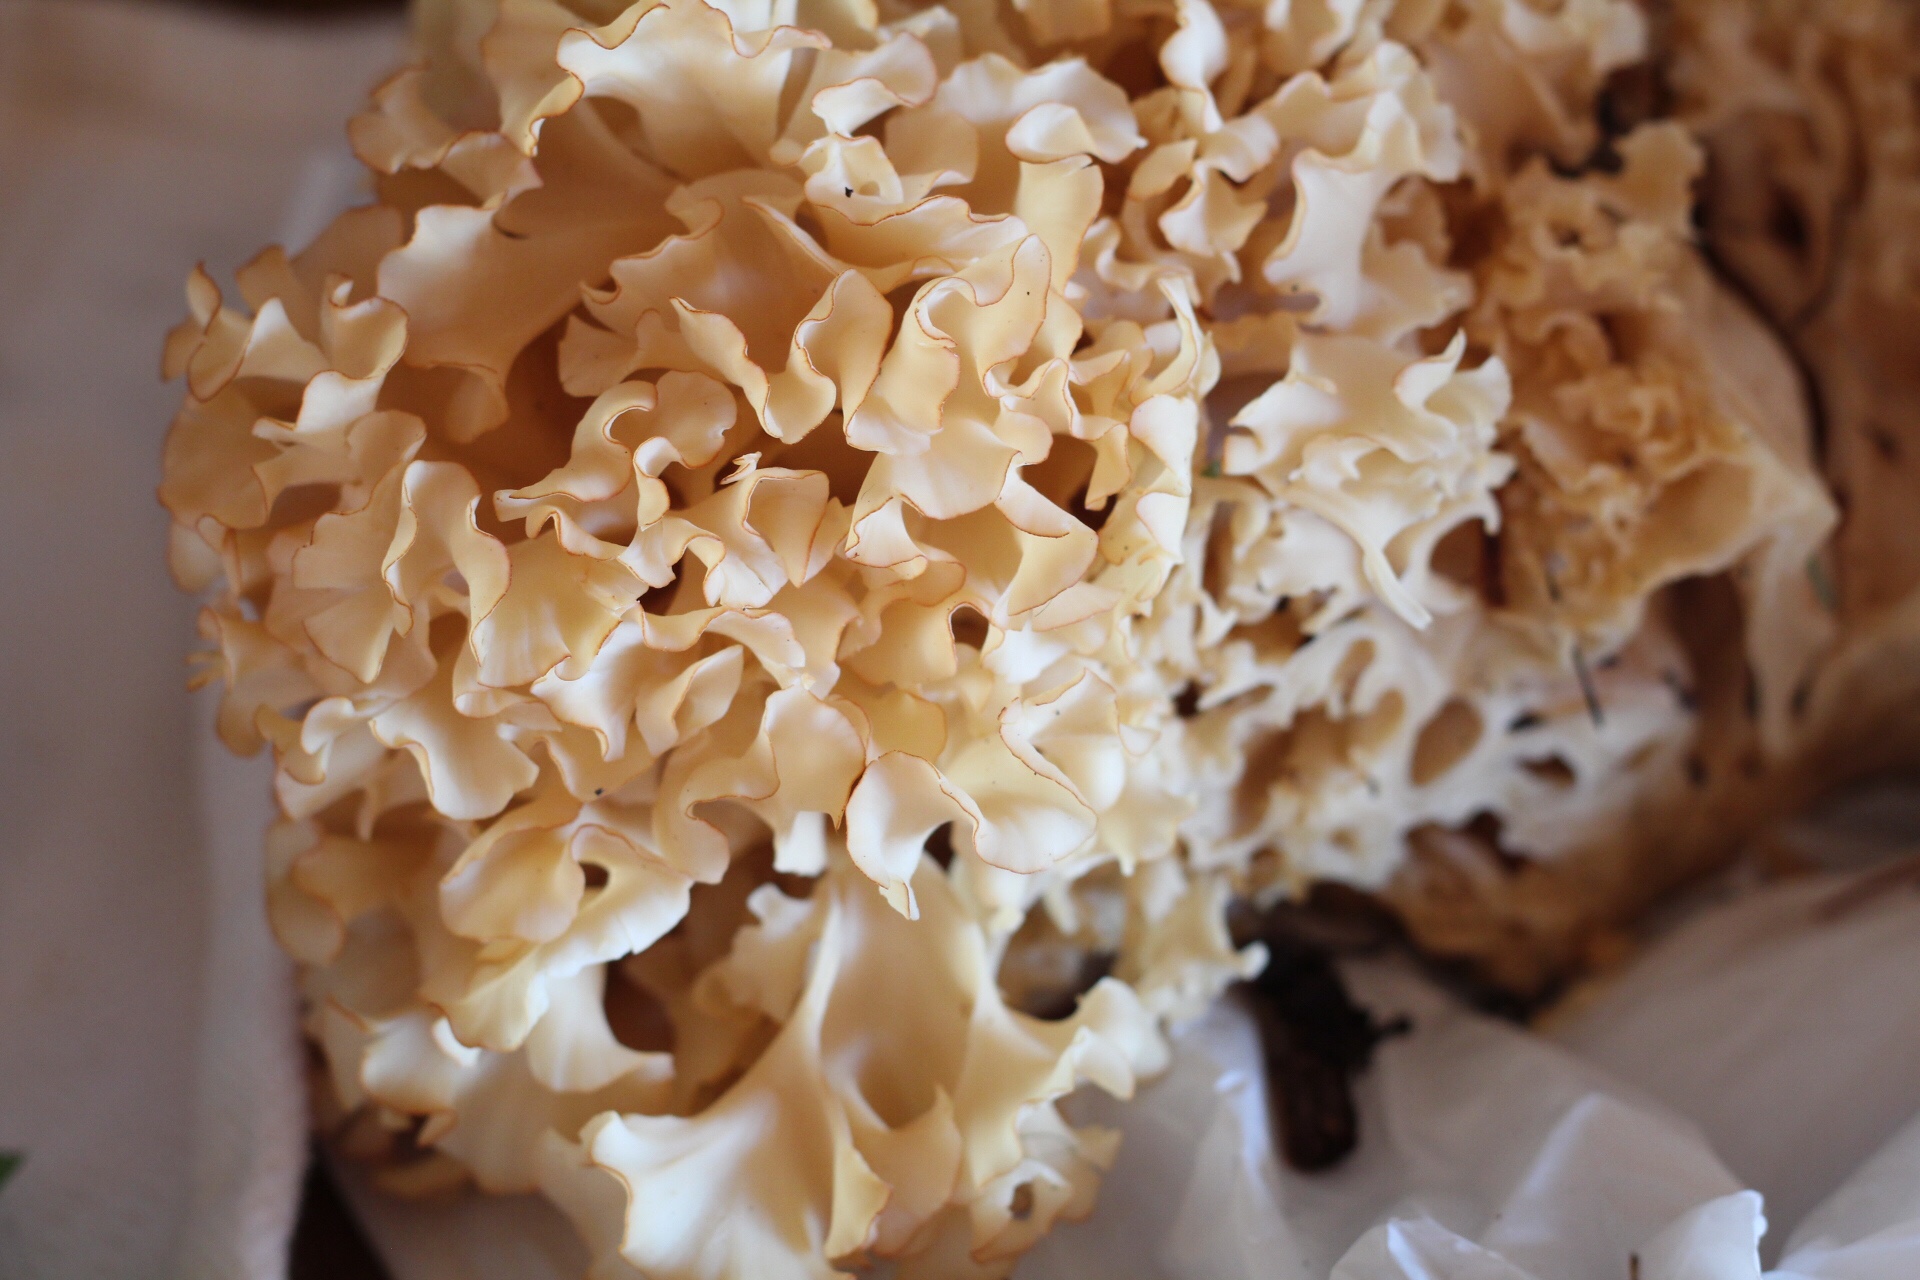 Closeup of wild cauliflower mushroom. It is creamy white in color with slightly darker frilly looking edges.